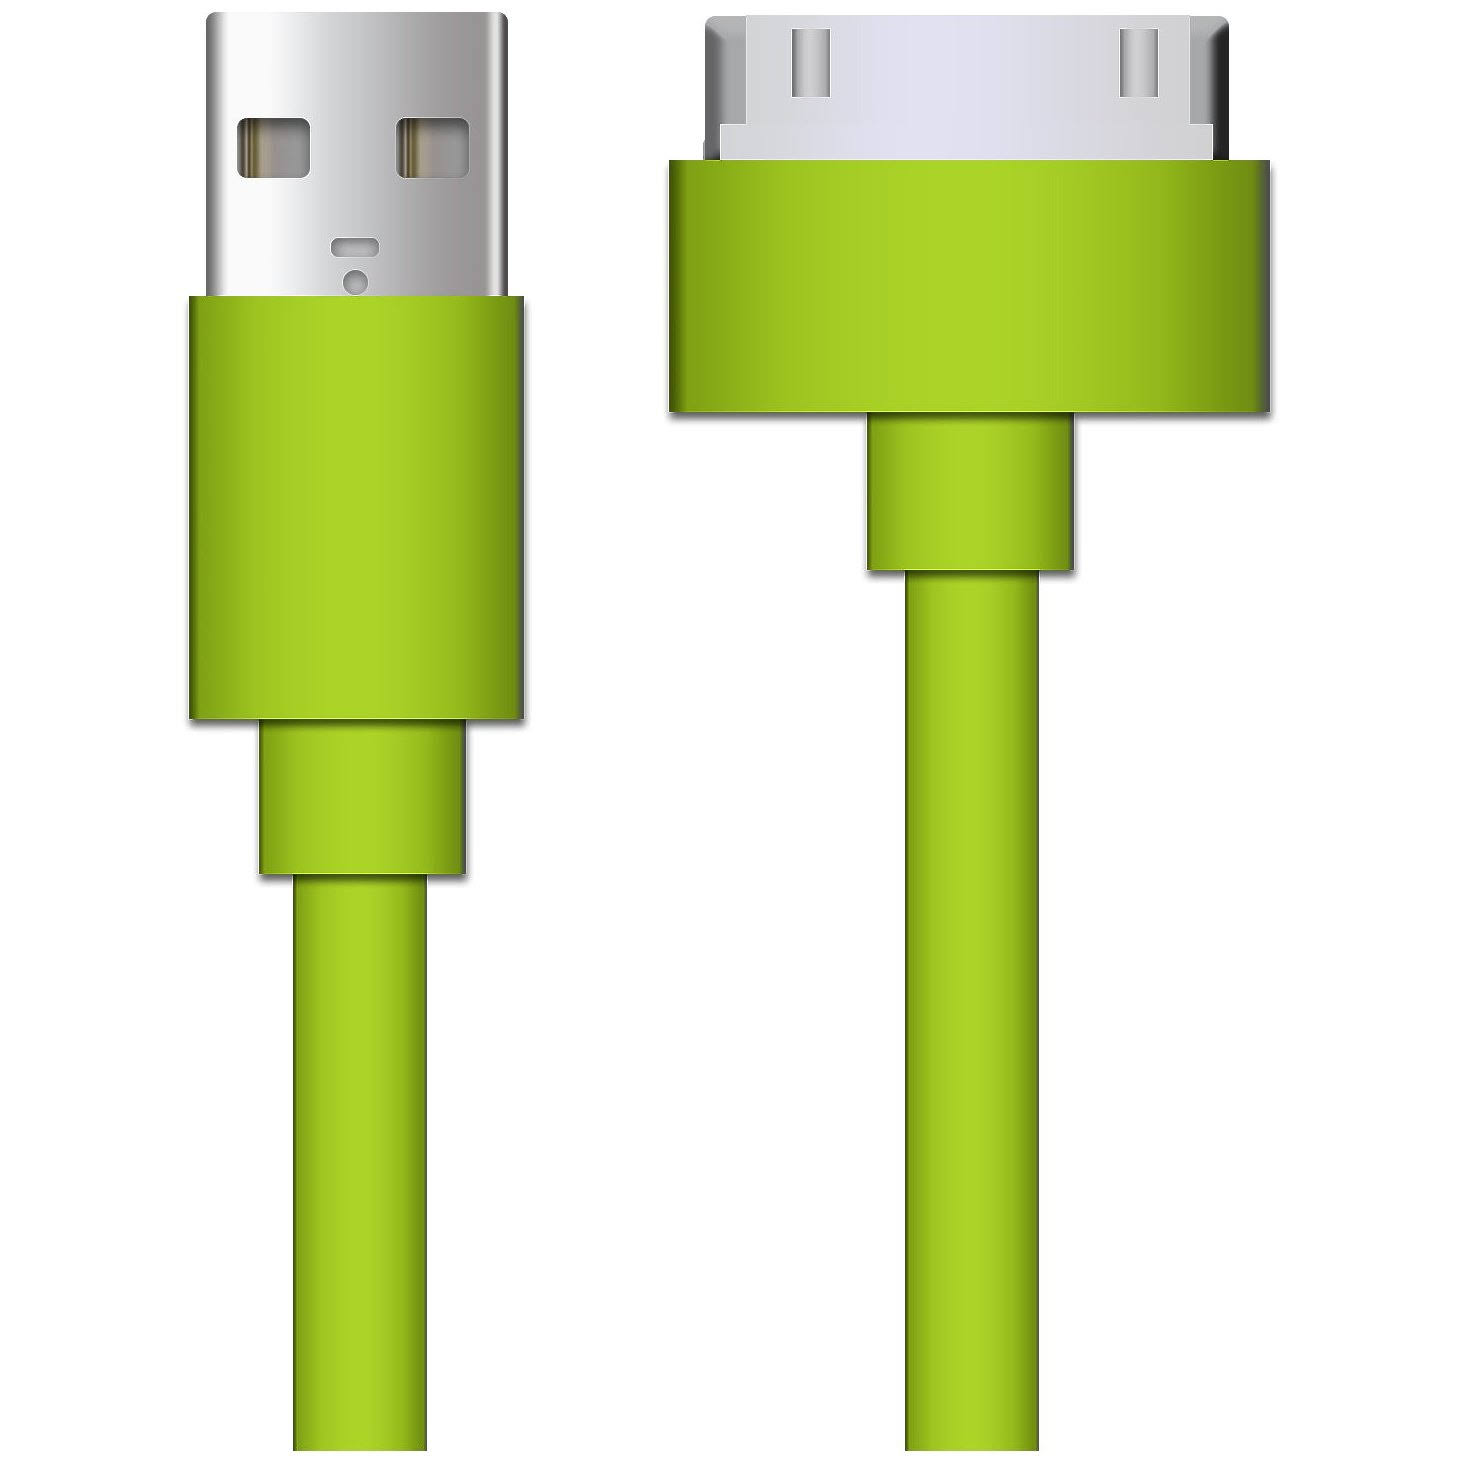 30 Pin To USB 0.9m Flat Tangle Free Data Sync and Charge Cable For iPod, iPHONE, iPAD, Green | Computers & Accessories | 30 Day Money Back Guarant